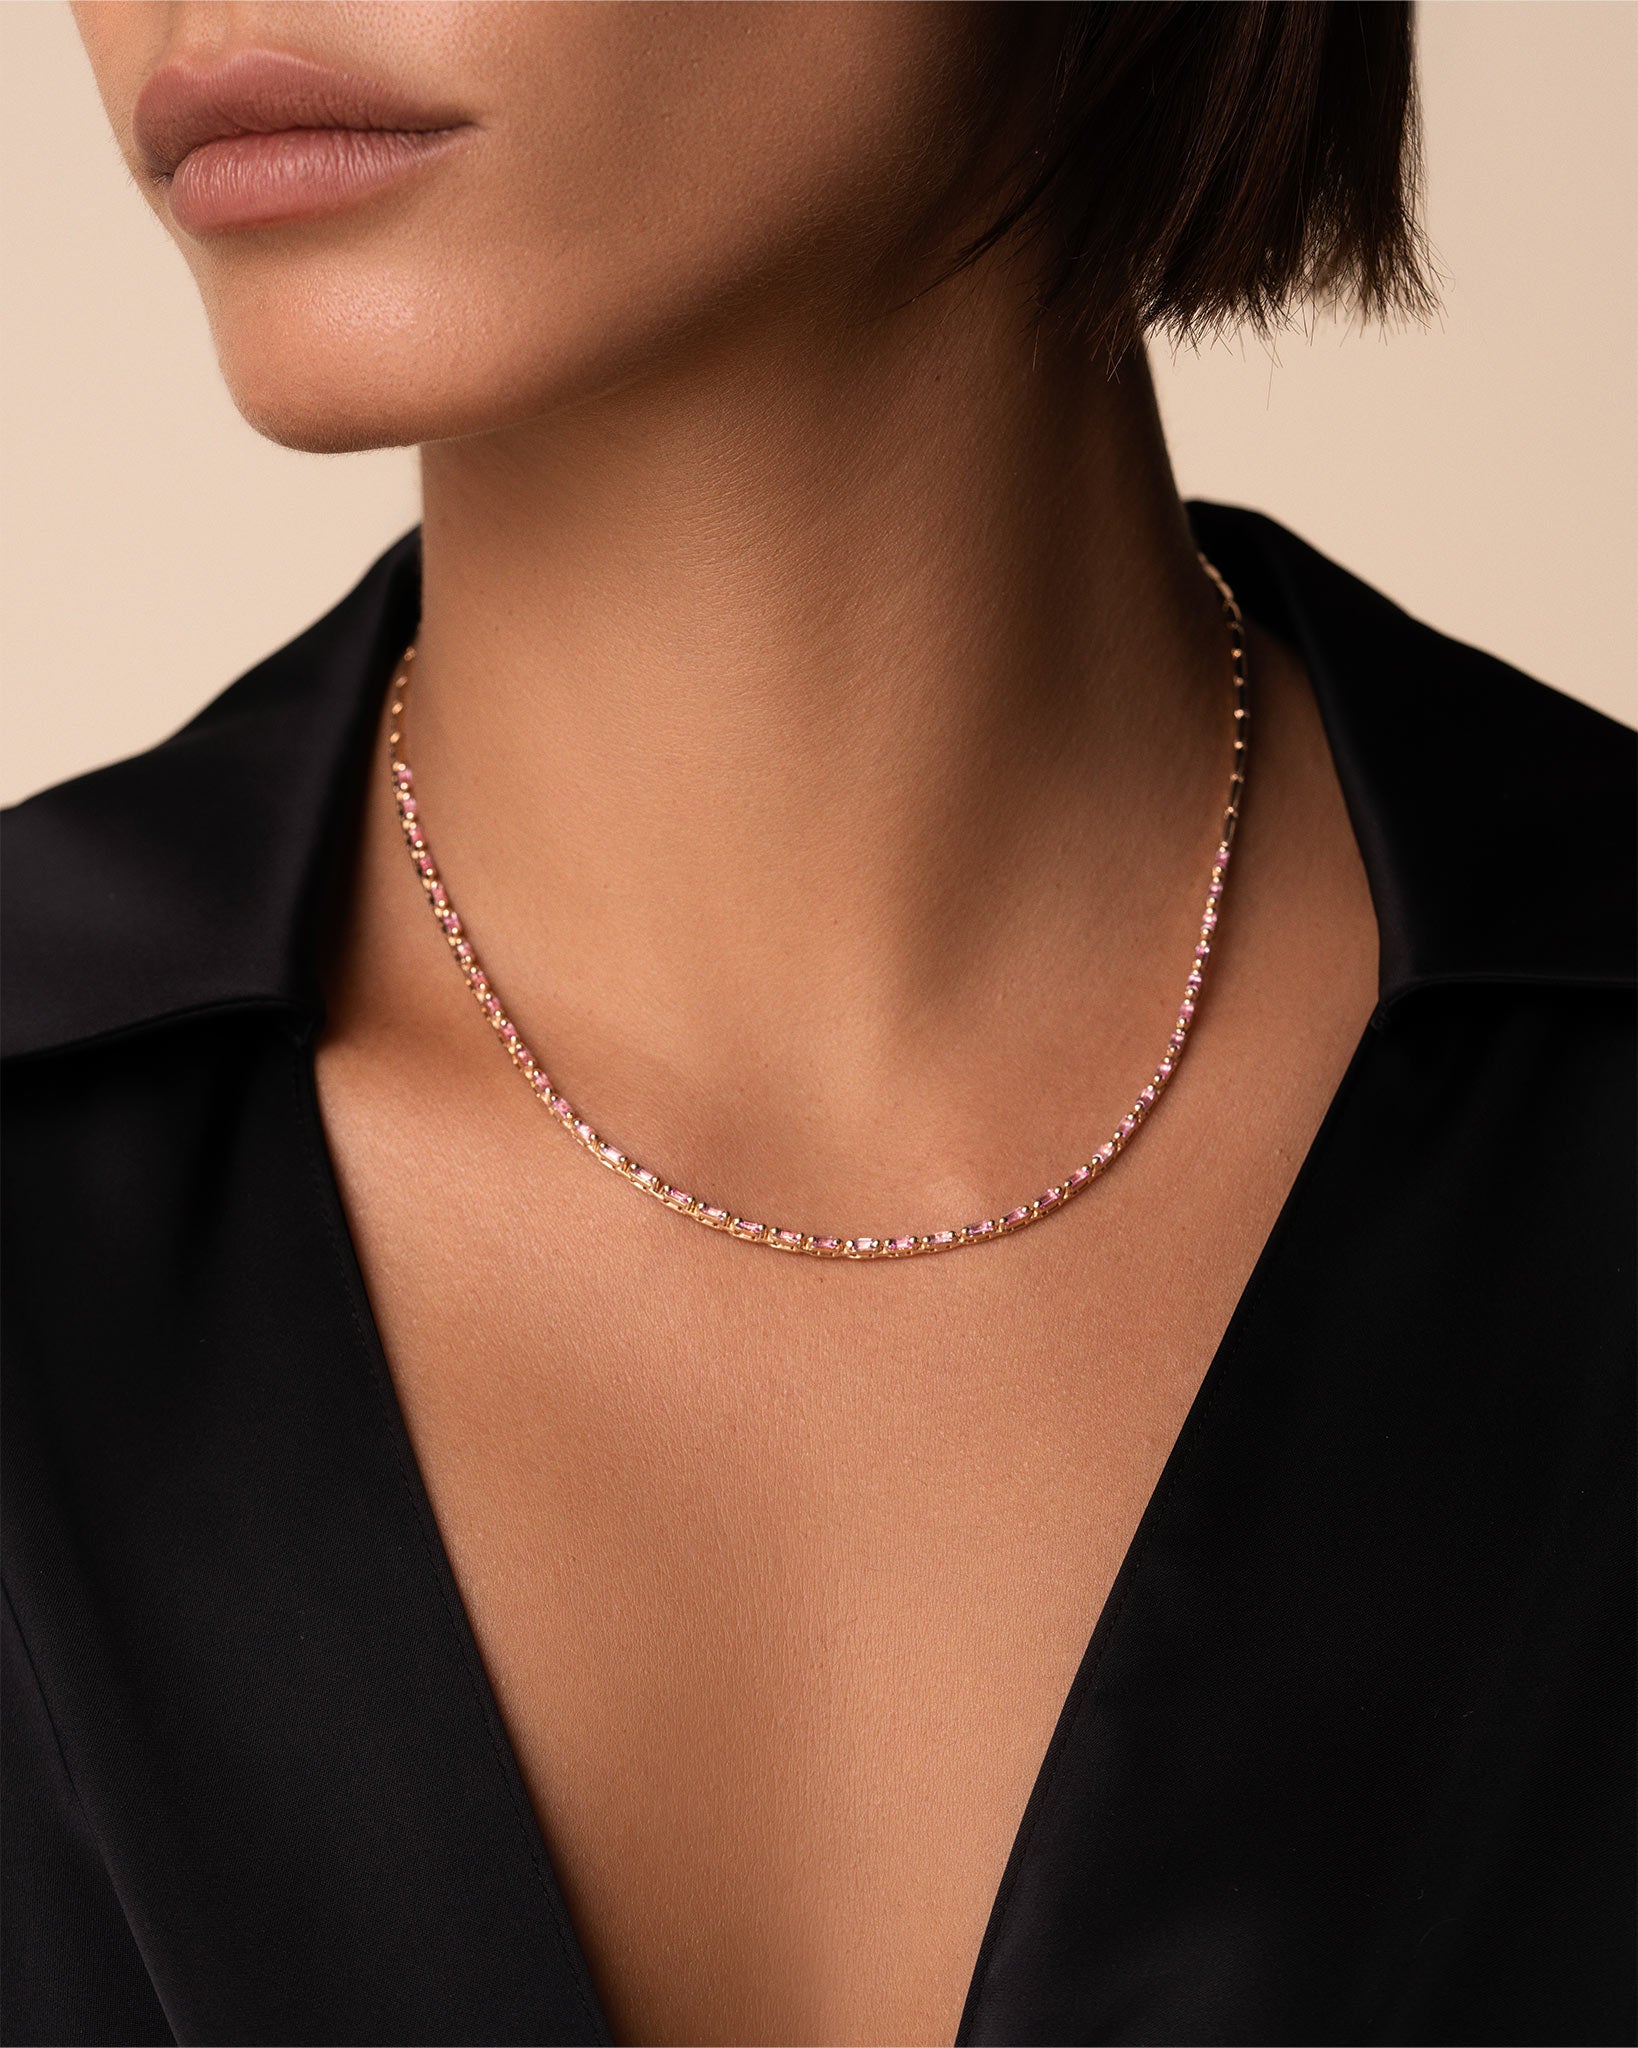 Aggregate 134+ rose gold tennis necklace